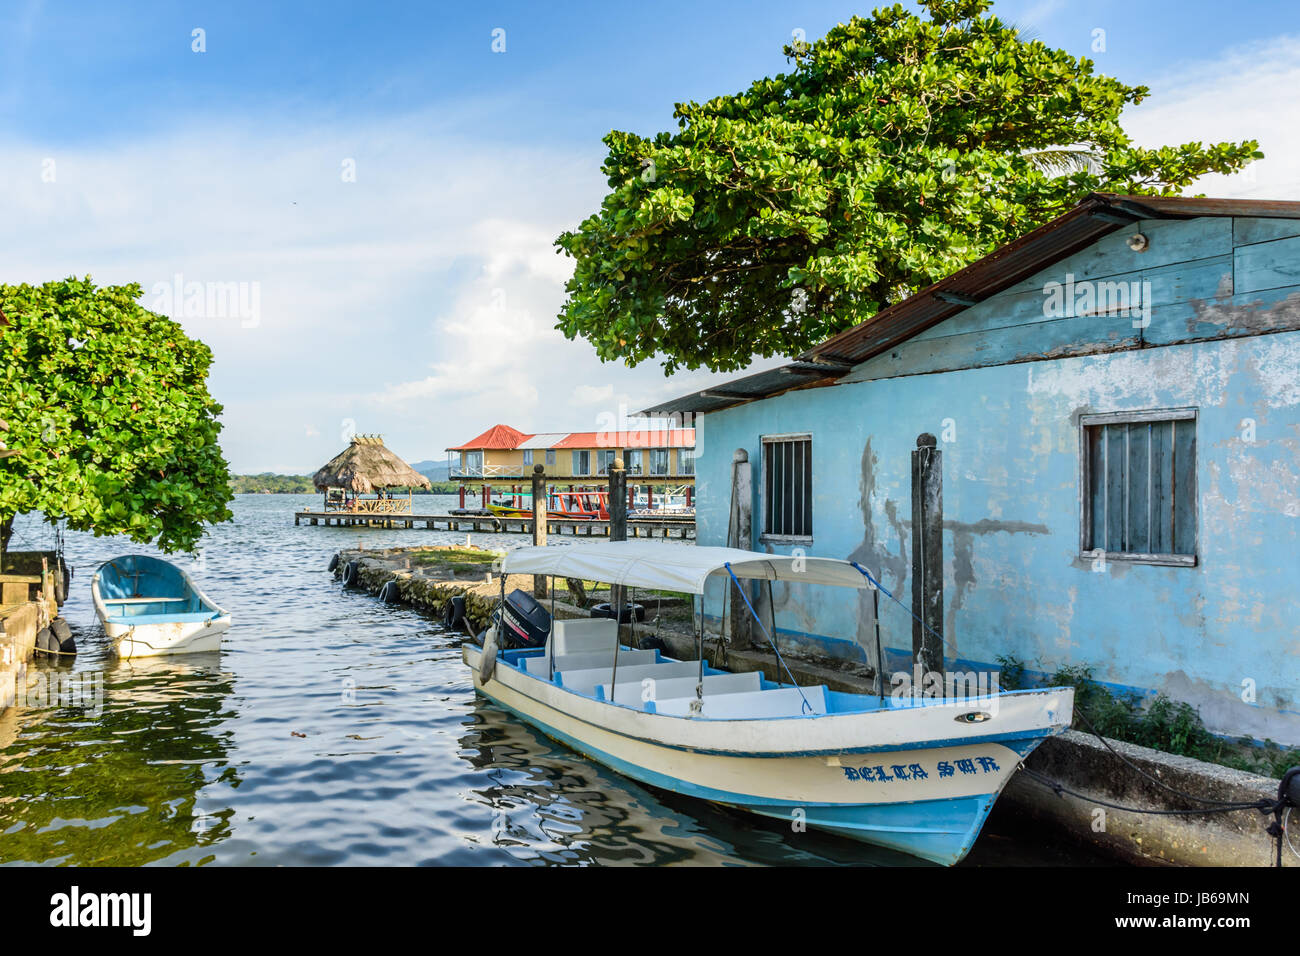 Livingston, Guatemala - August 31, 2016: Boats moored along commercial area of riverbank on estuary of Rio Dulce in Caribbean town of Livingston Stock Photo